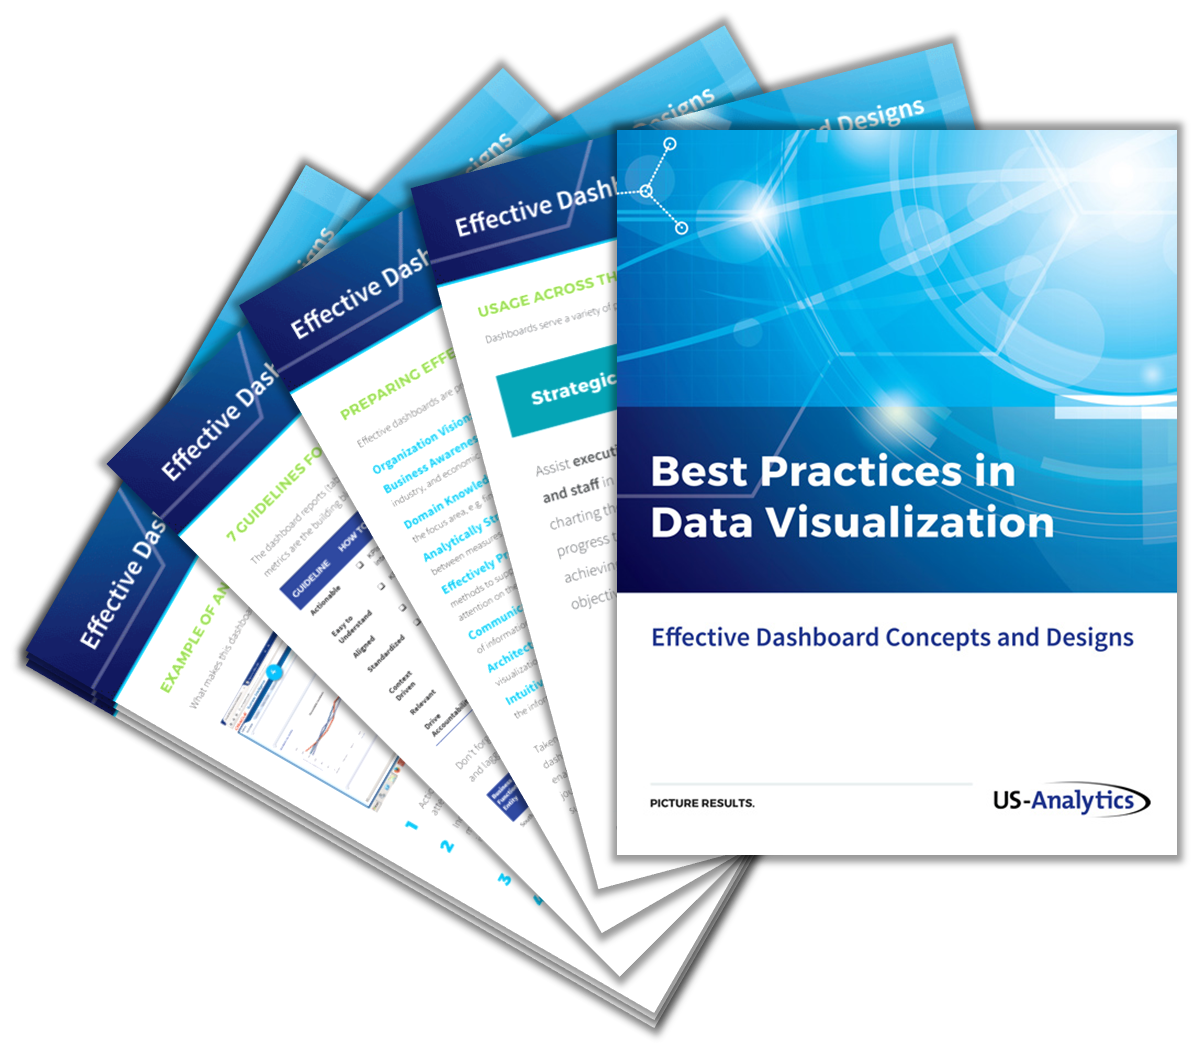 Best_Practices_in_Data_Visualization_White_Paper_Cover_Image-Jan-22-2023-10-48-47-9016-PM